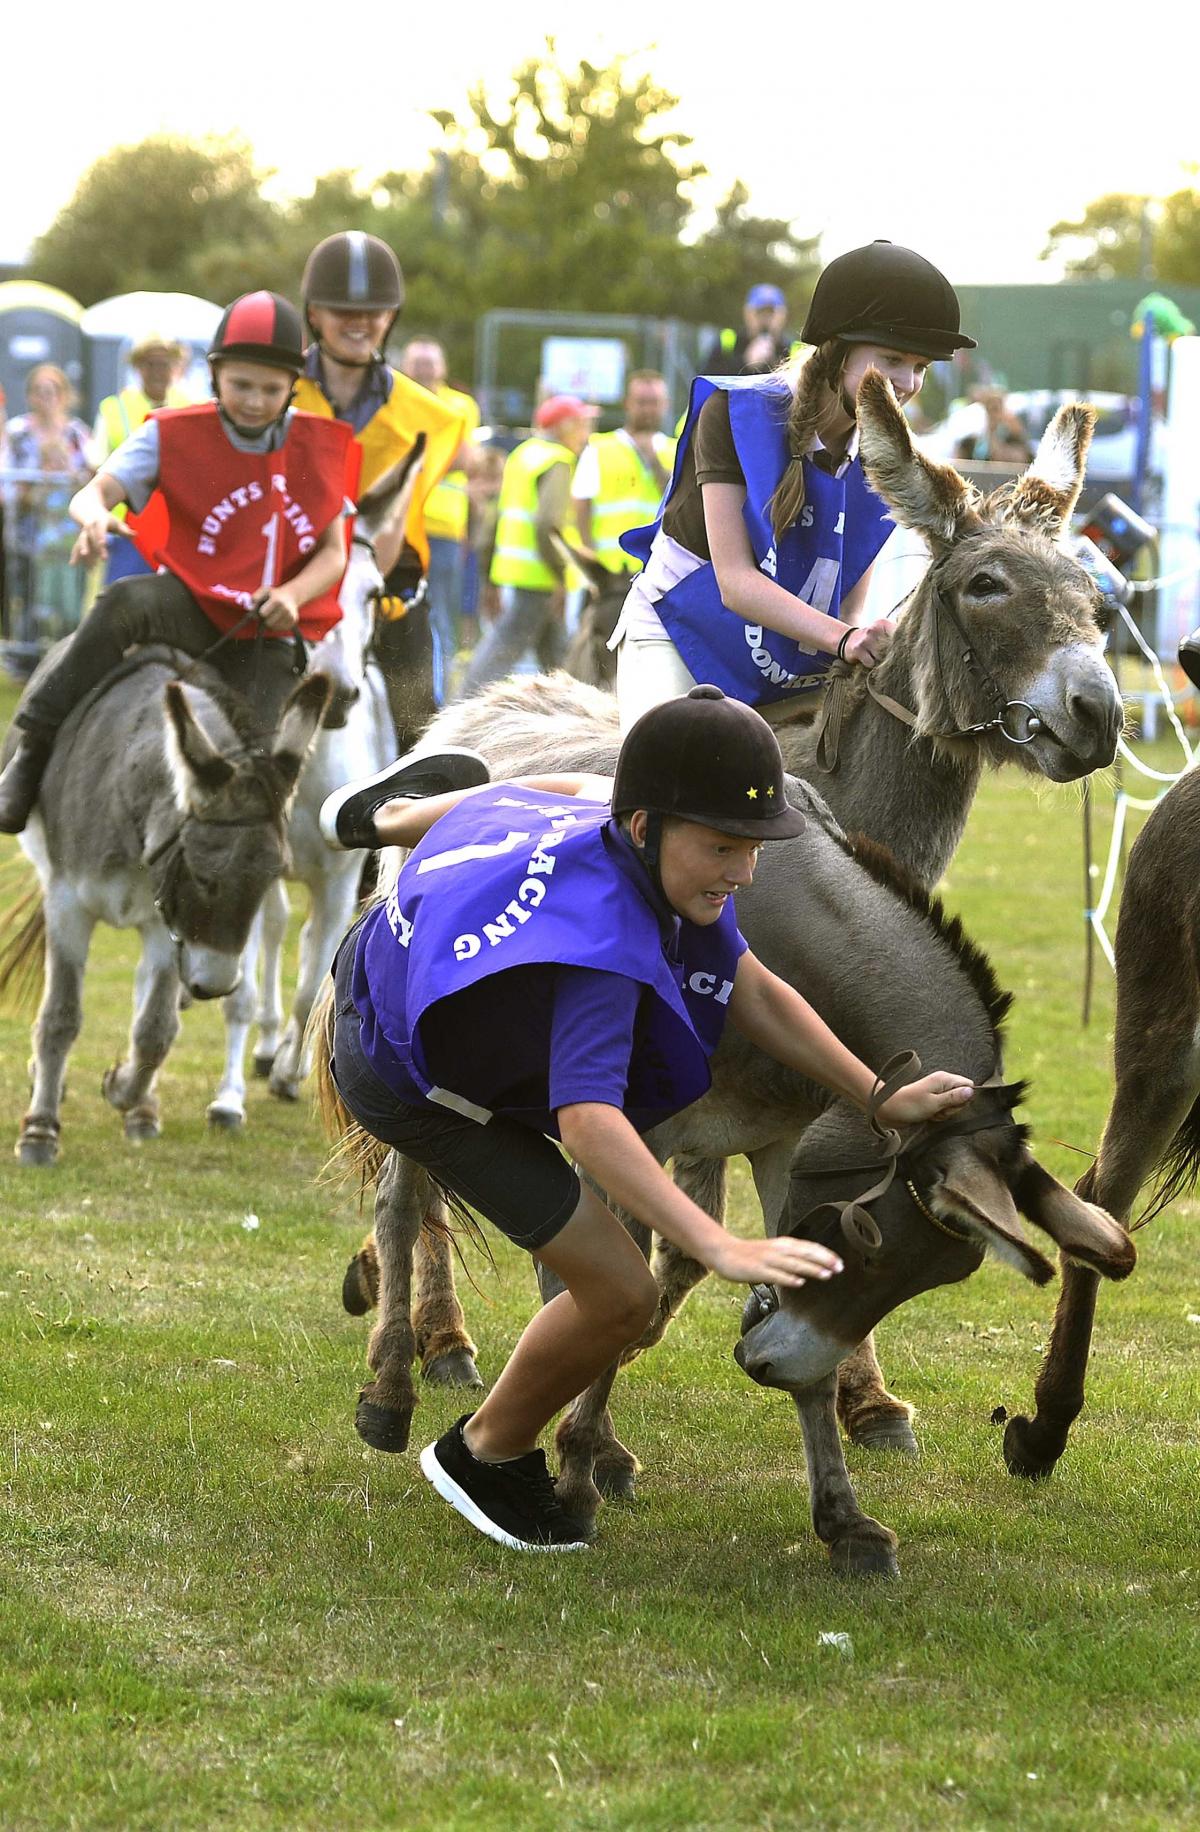 An action shot from Clacton Carnival's Donkey Derby